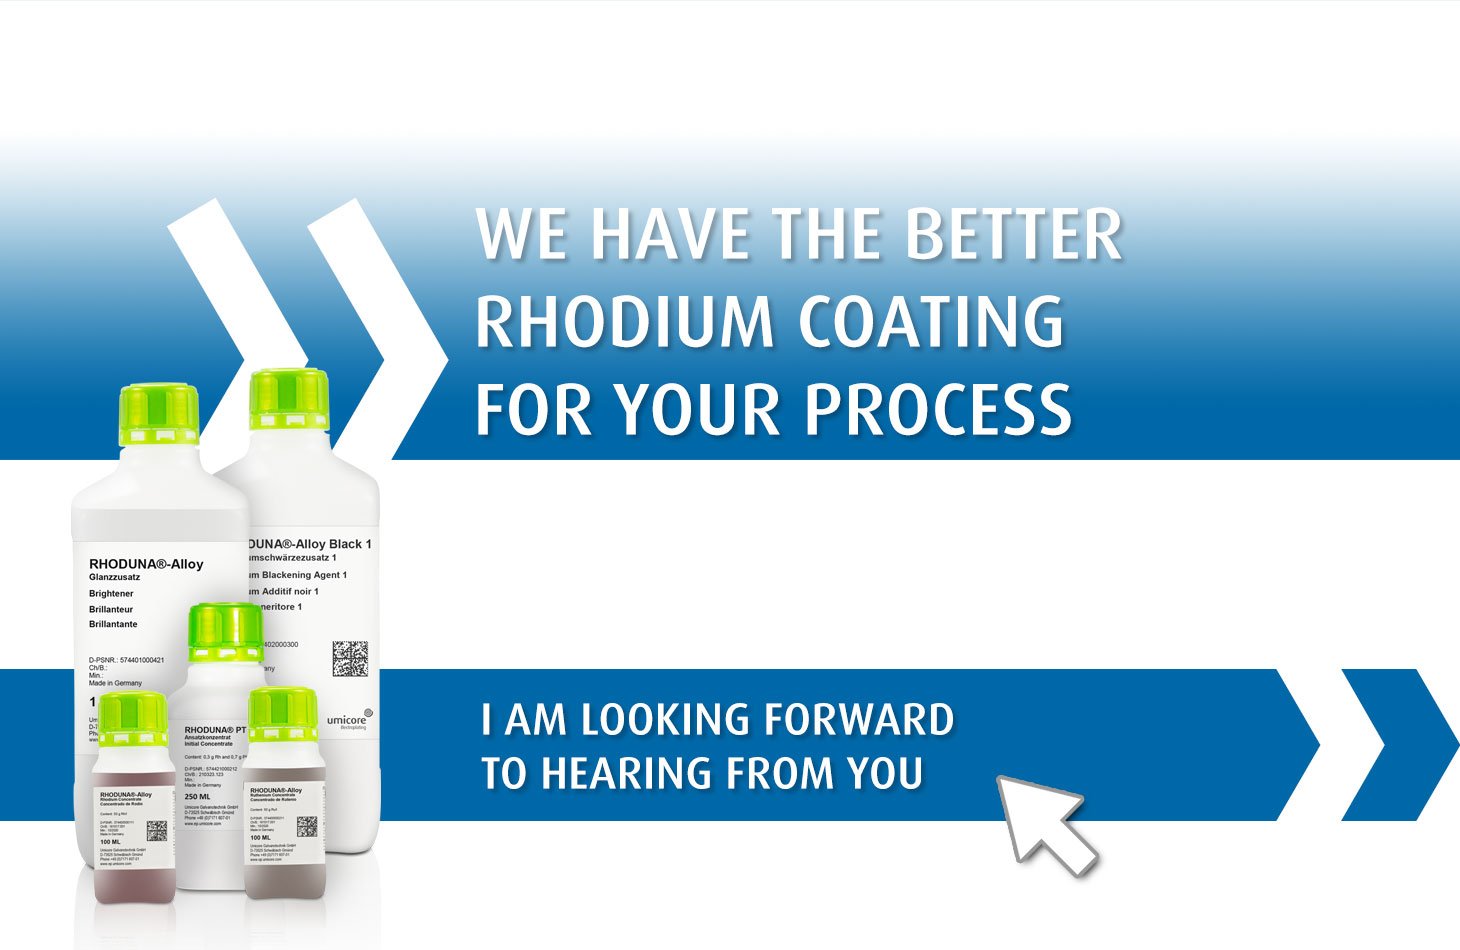 RHODUNA Alloy – abrasion resistant like no other bright white rhodium coating - Umicore Metal Deposition Solutions - Contact